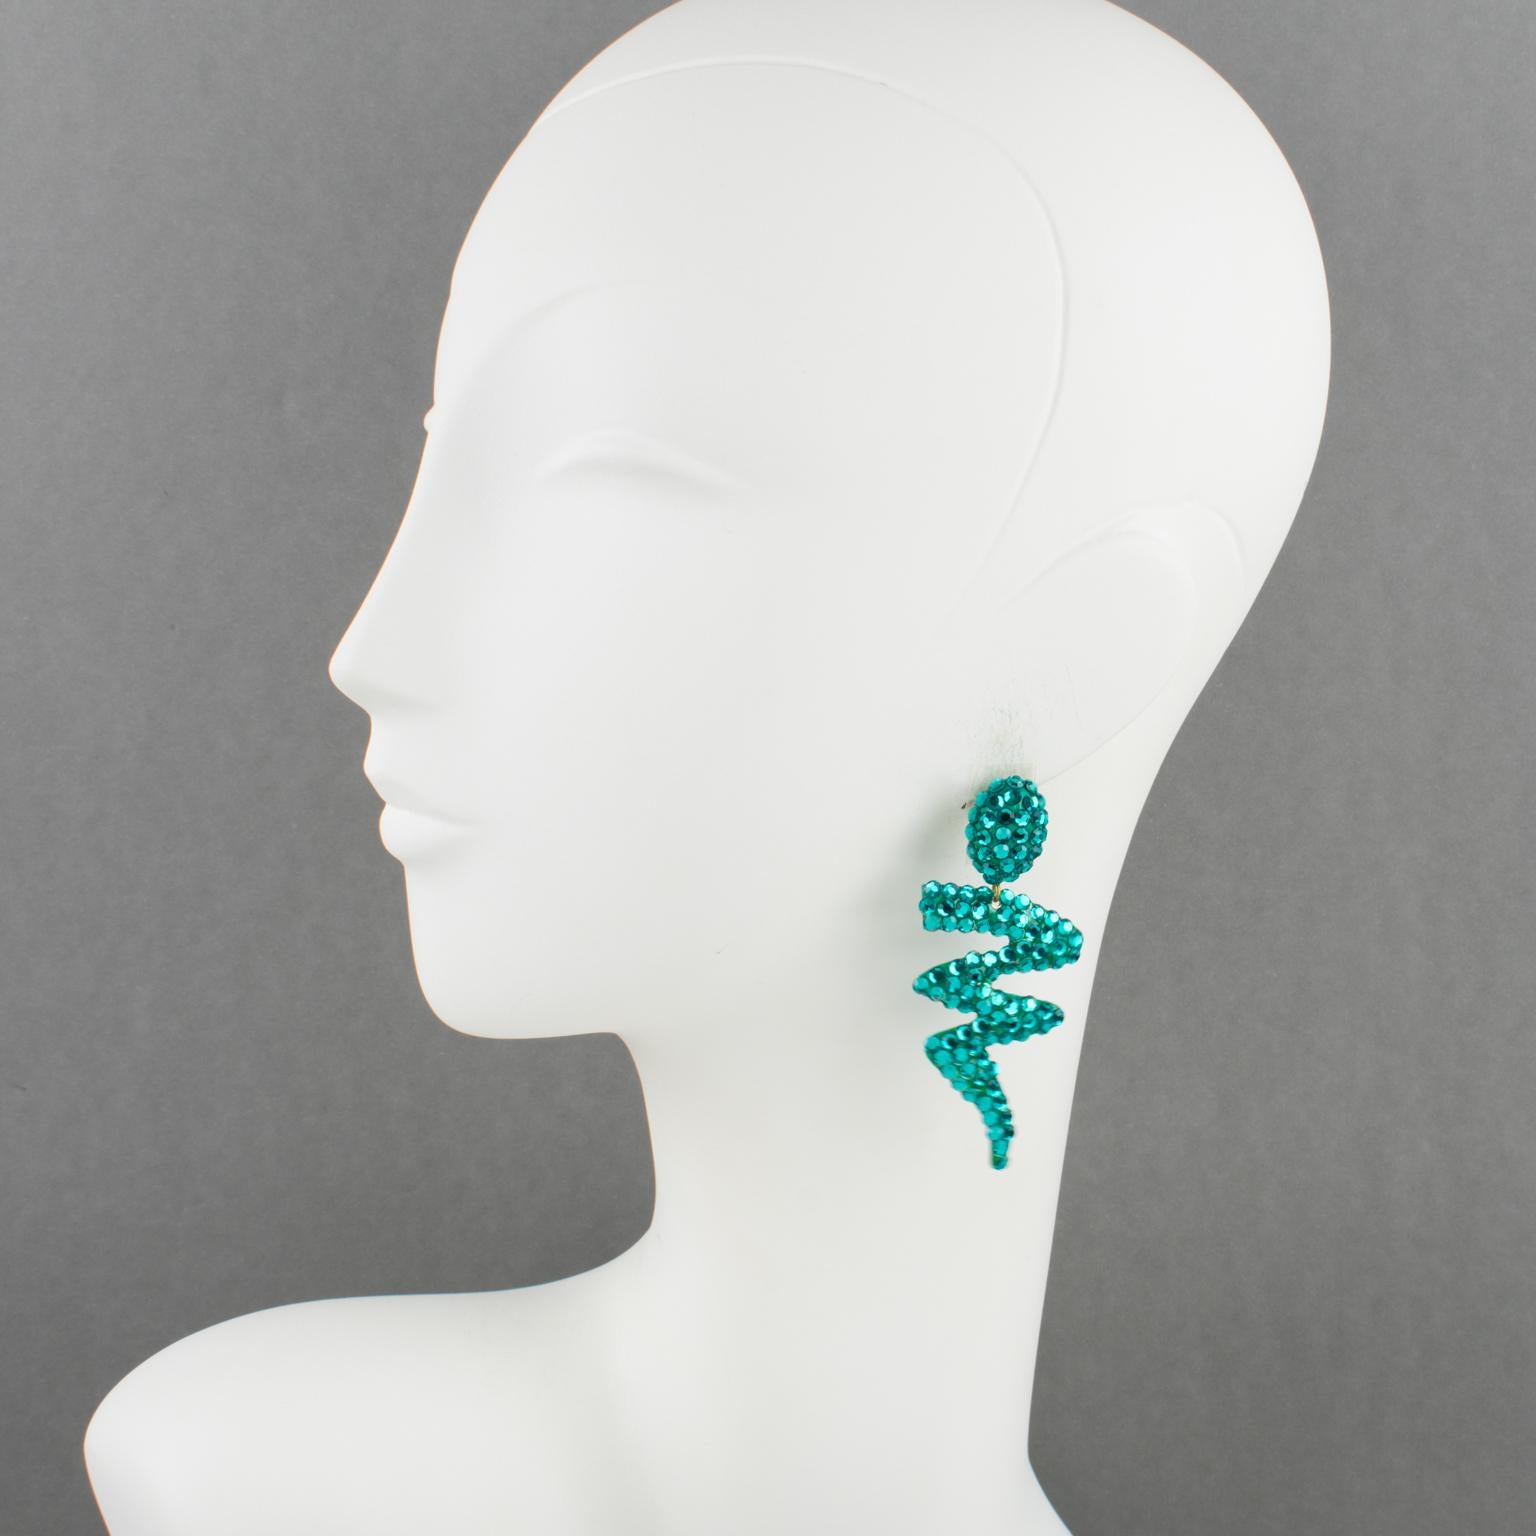 Richard Kerr designed these elegant pierced earrings in the 1980s. They are made up of his signature paved crystal rhinestones. They feature a long dangle zig-zag turquoise resin shape, all covered with turquoise color crystal rhinestones. There is